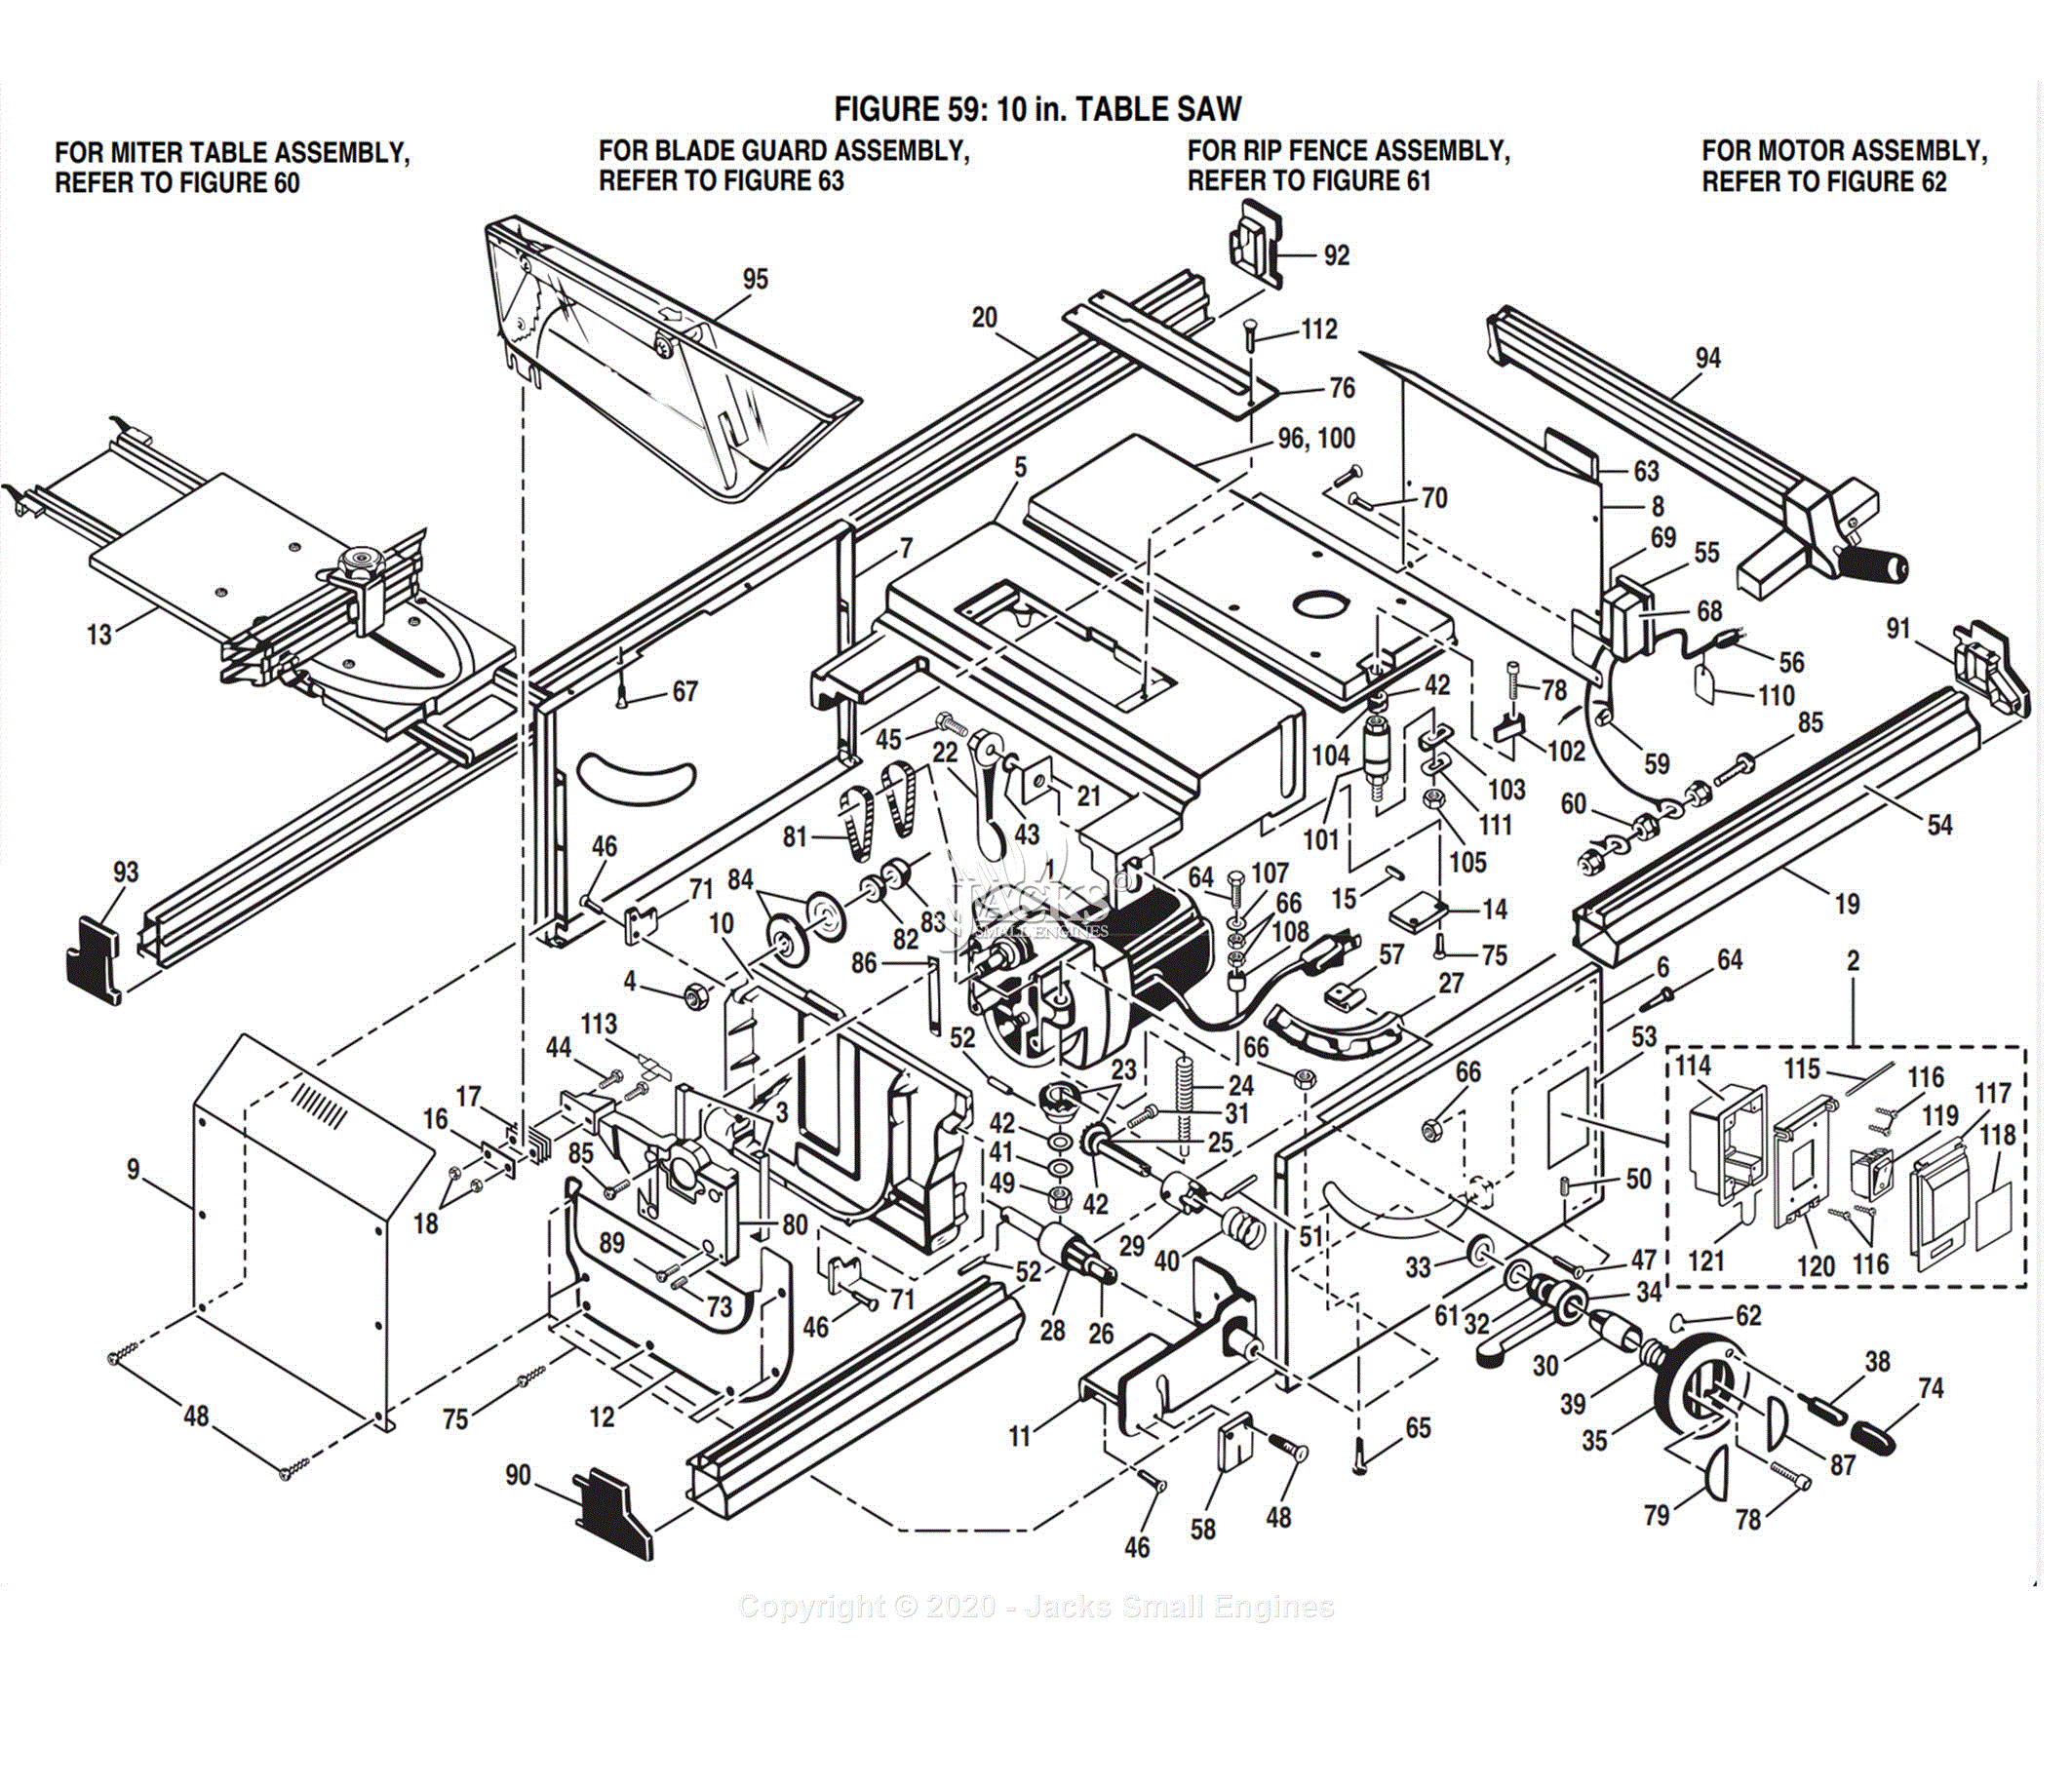 Ryobi Bt3000 Parts Diagram For Figure 59 10 In Table Saw | Free ...